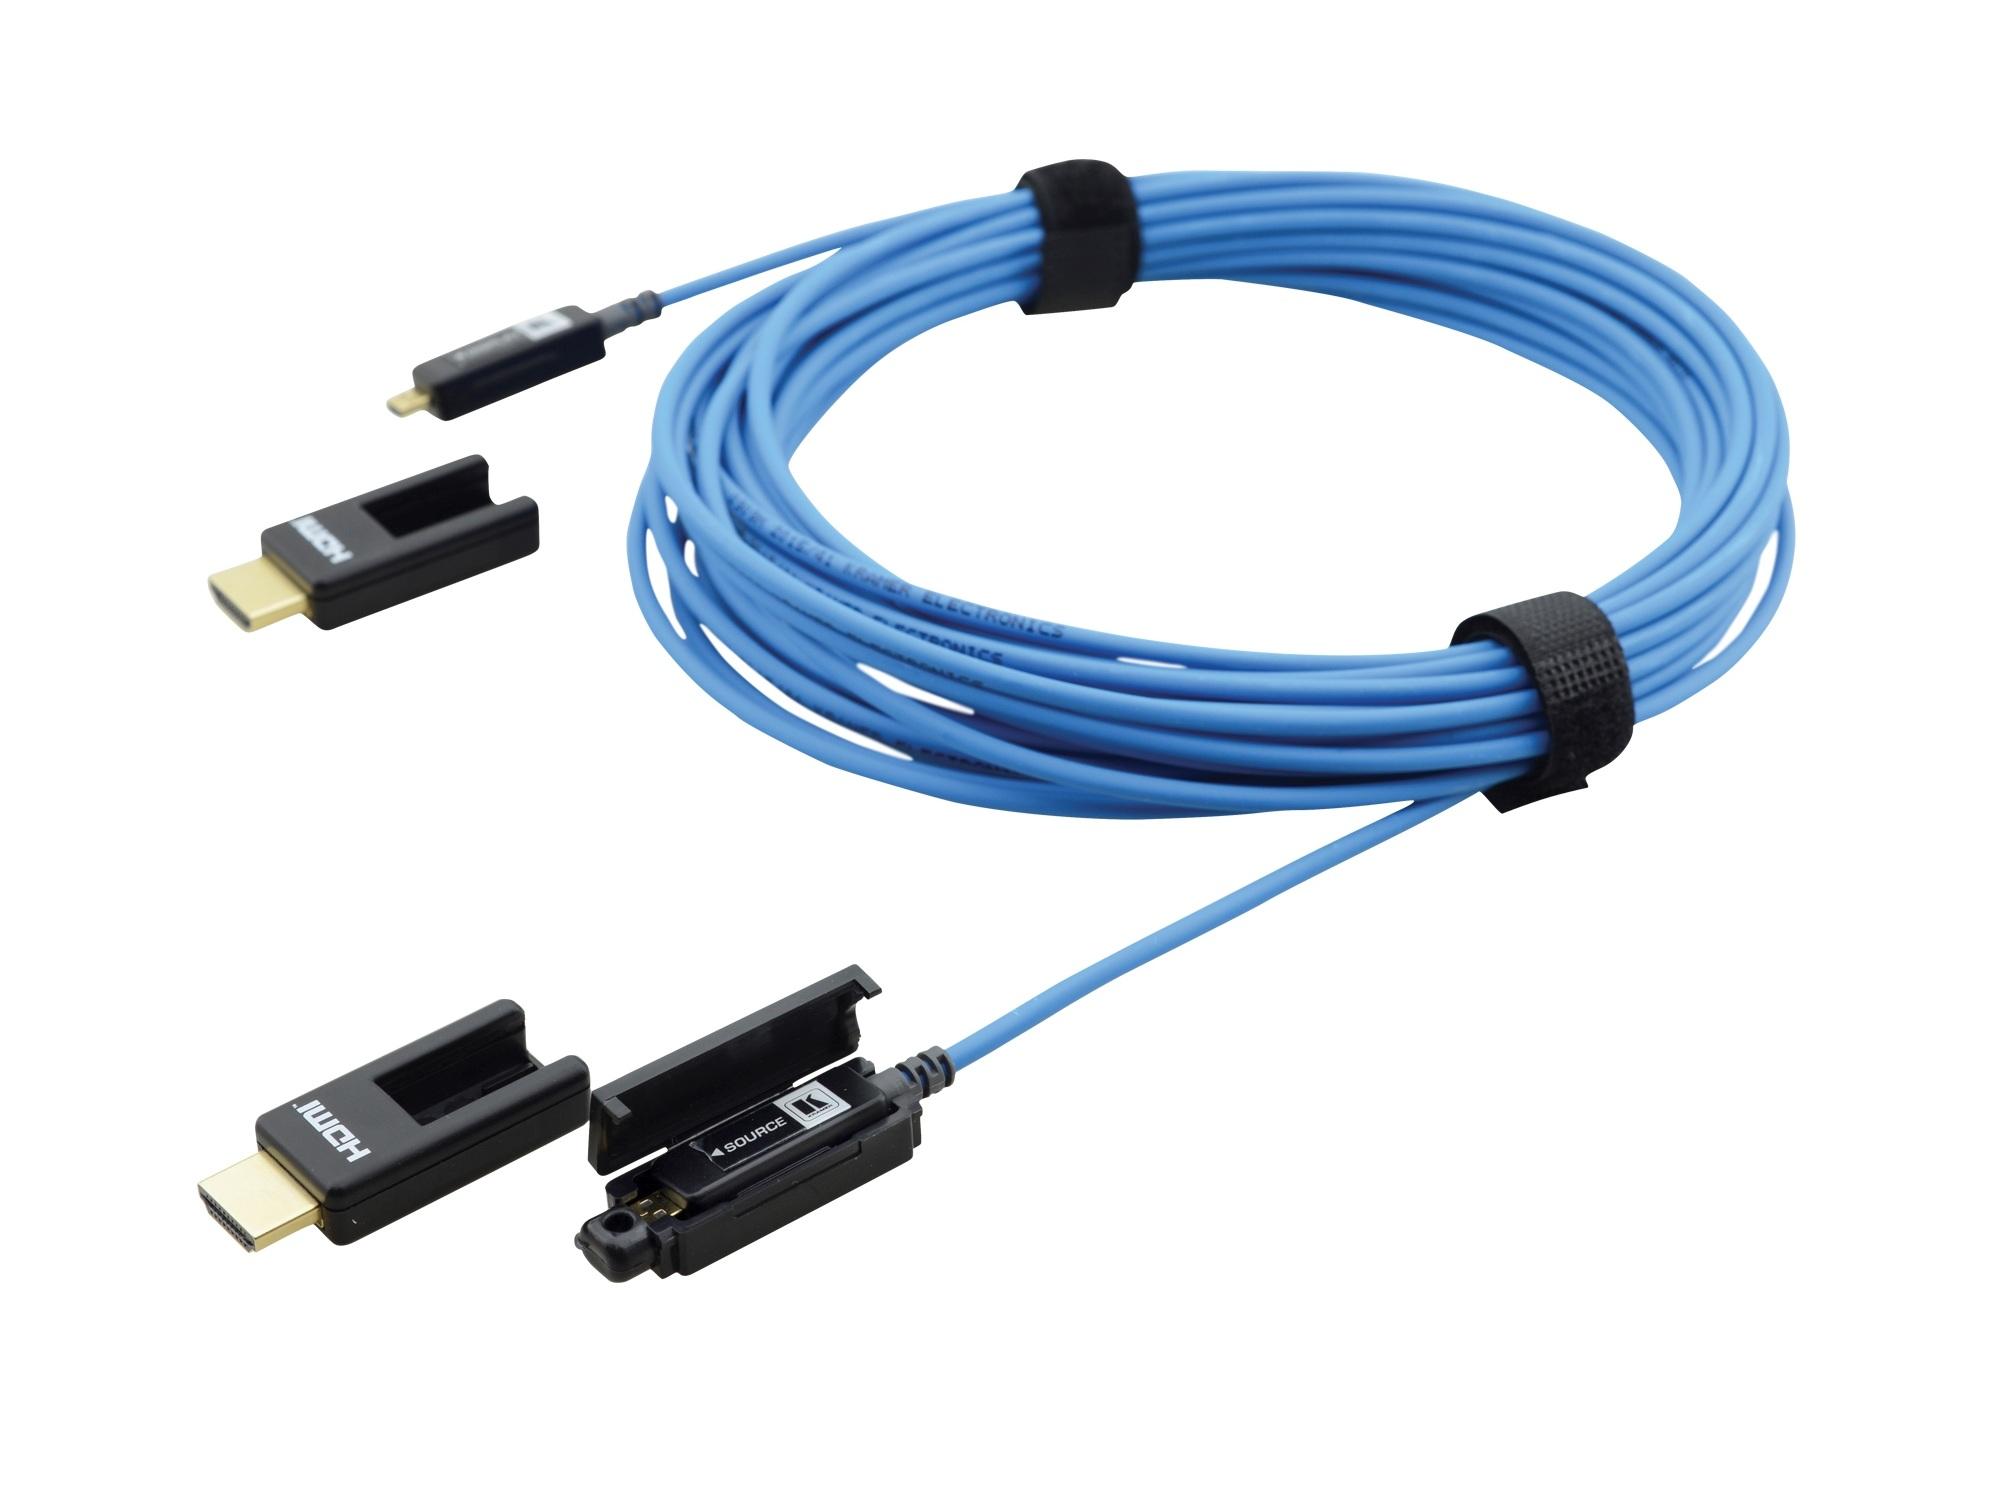 CP-AOCH/XL-328 Fiber Optic High-Speed Pluggable HDMI Cable - 328ft by Kramer